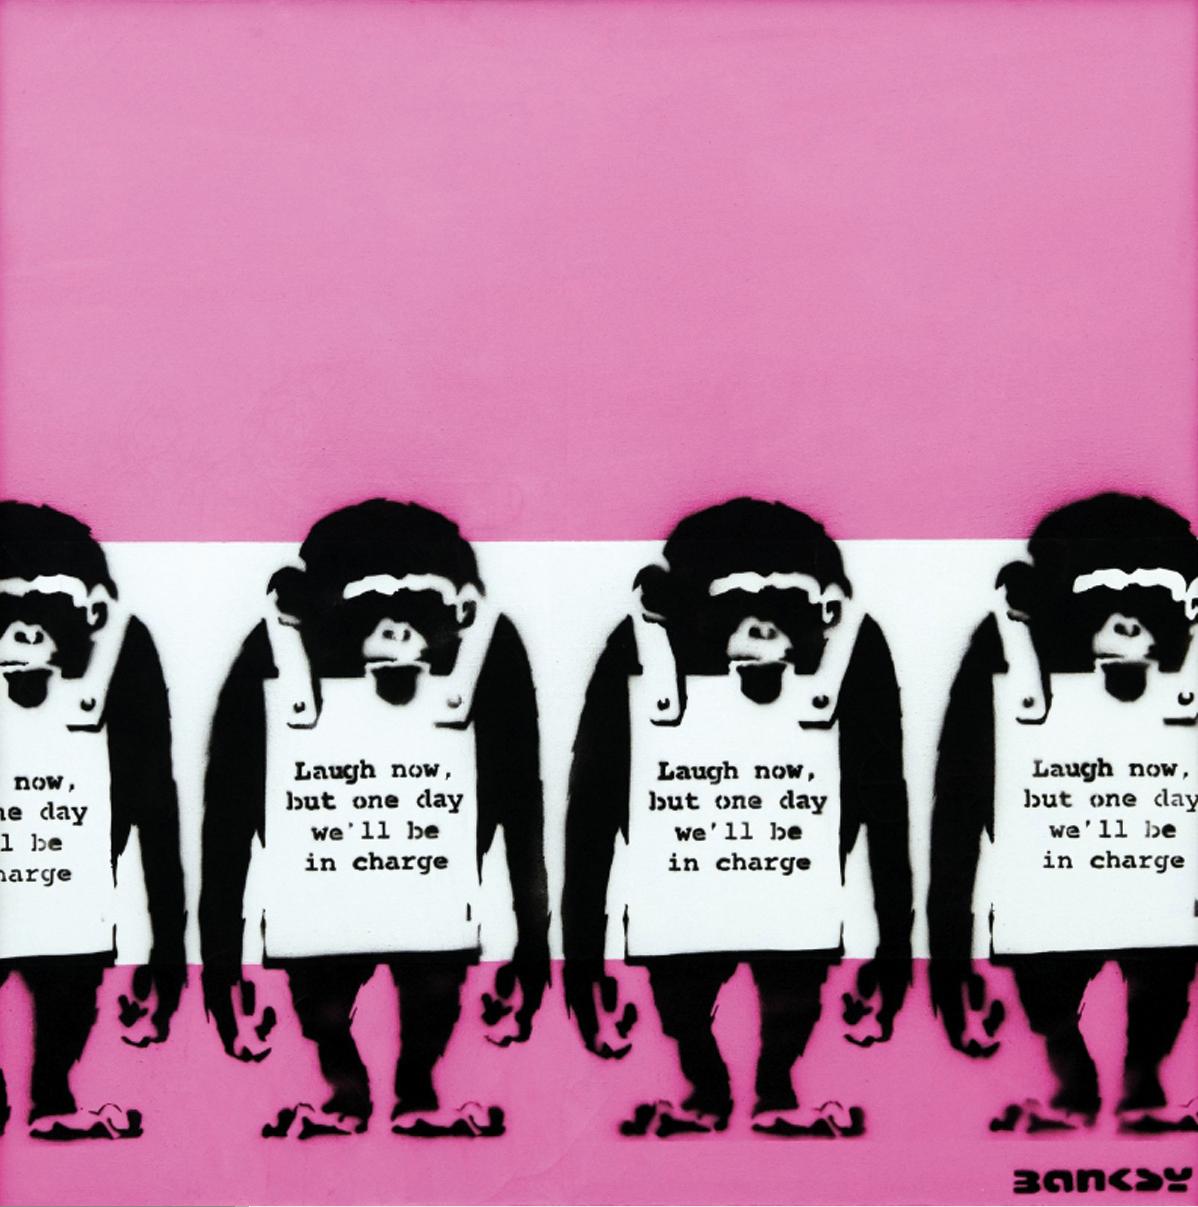 British street artist Banksy's <i>Four Monkeys</i> is part of the exhibition Laugh Now at Moco, Amsterdam / Moco Museum